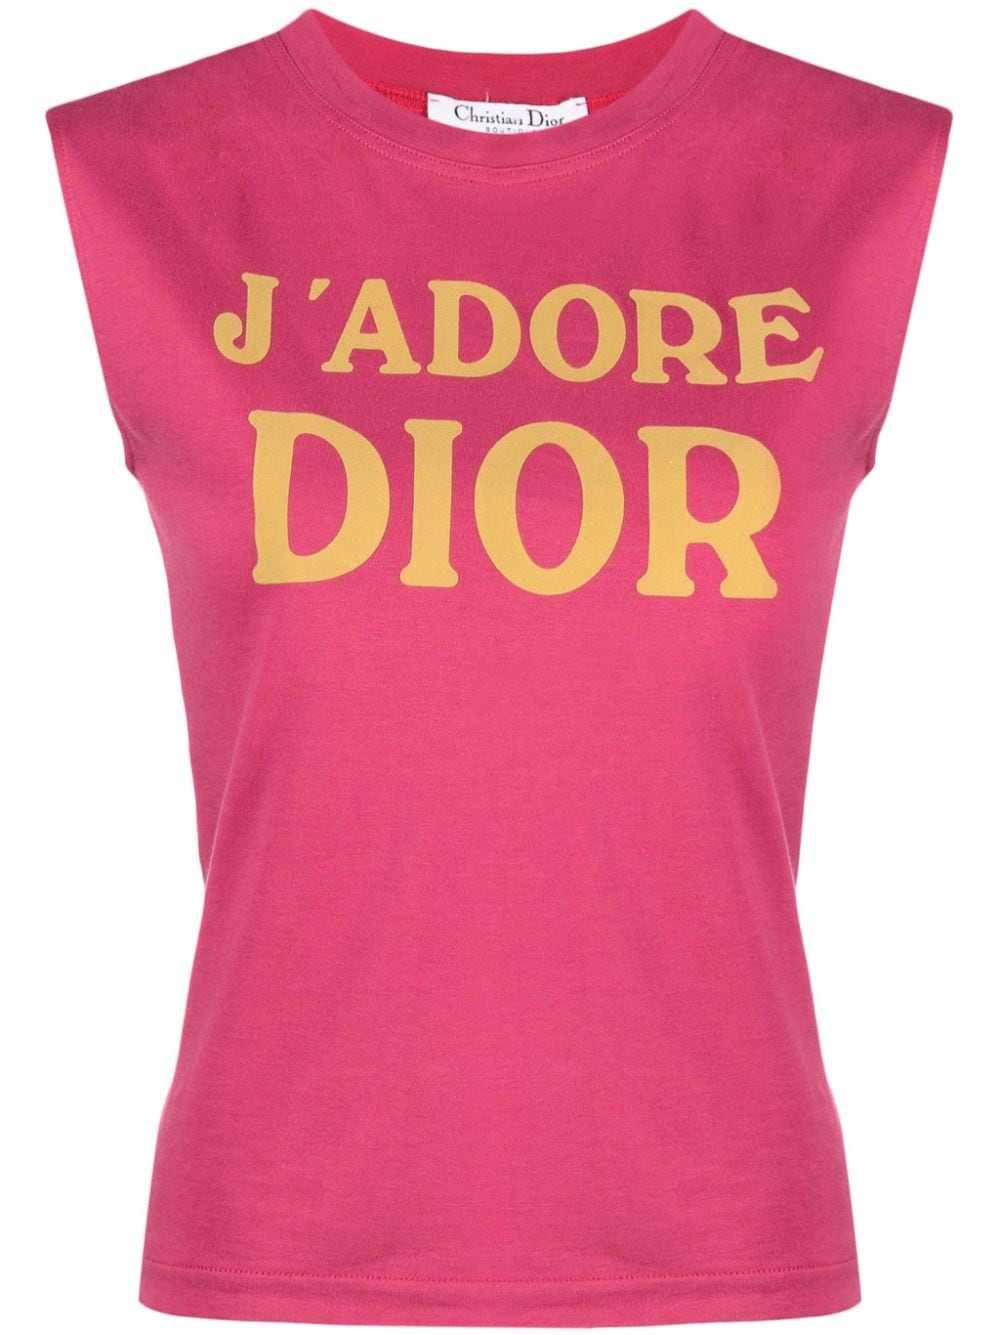 Christian Dior Pre-Owned 2002 J'Adore Dior tank t… - image 1